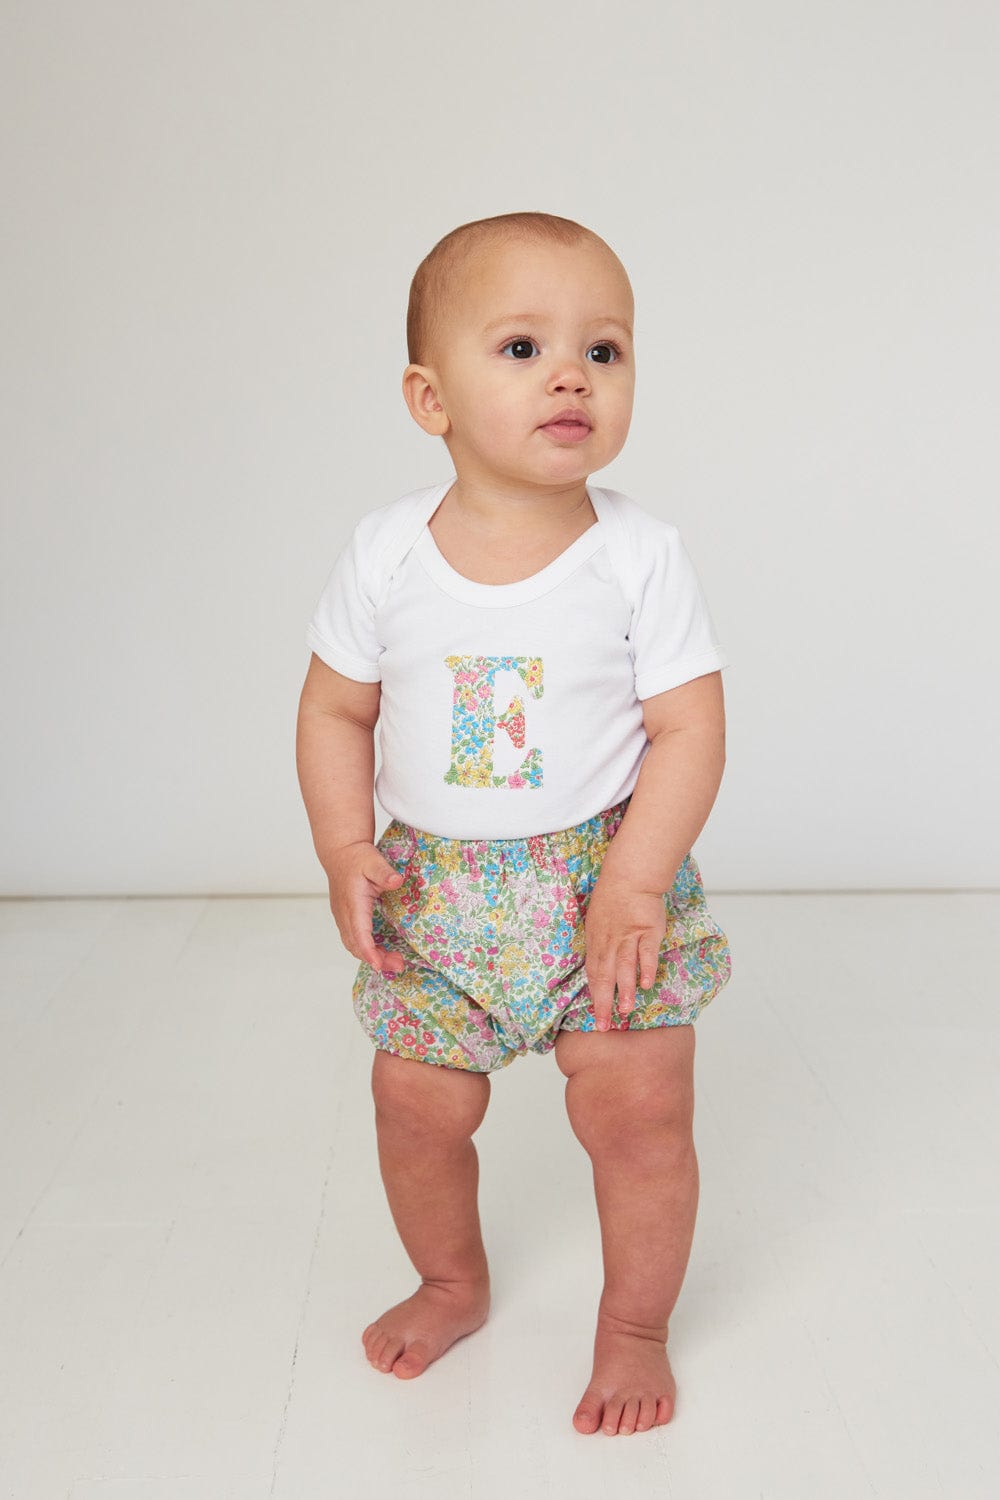 Magnificent Stanley Bodysuit Personalised Bodysuit in Joanna Louise Liberty Print